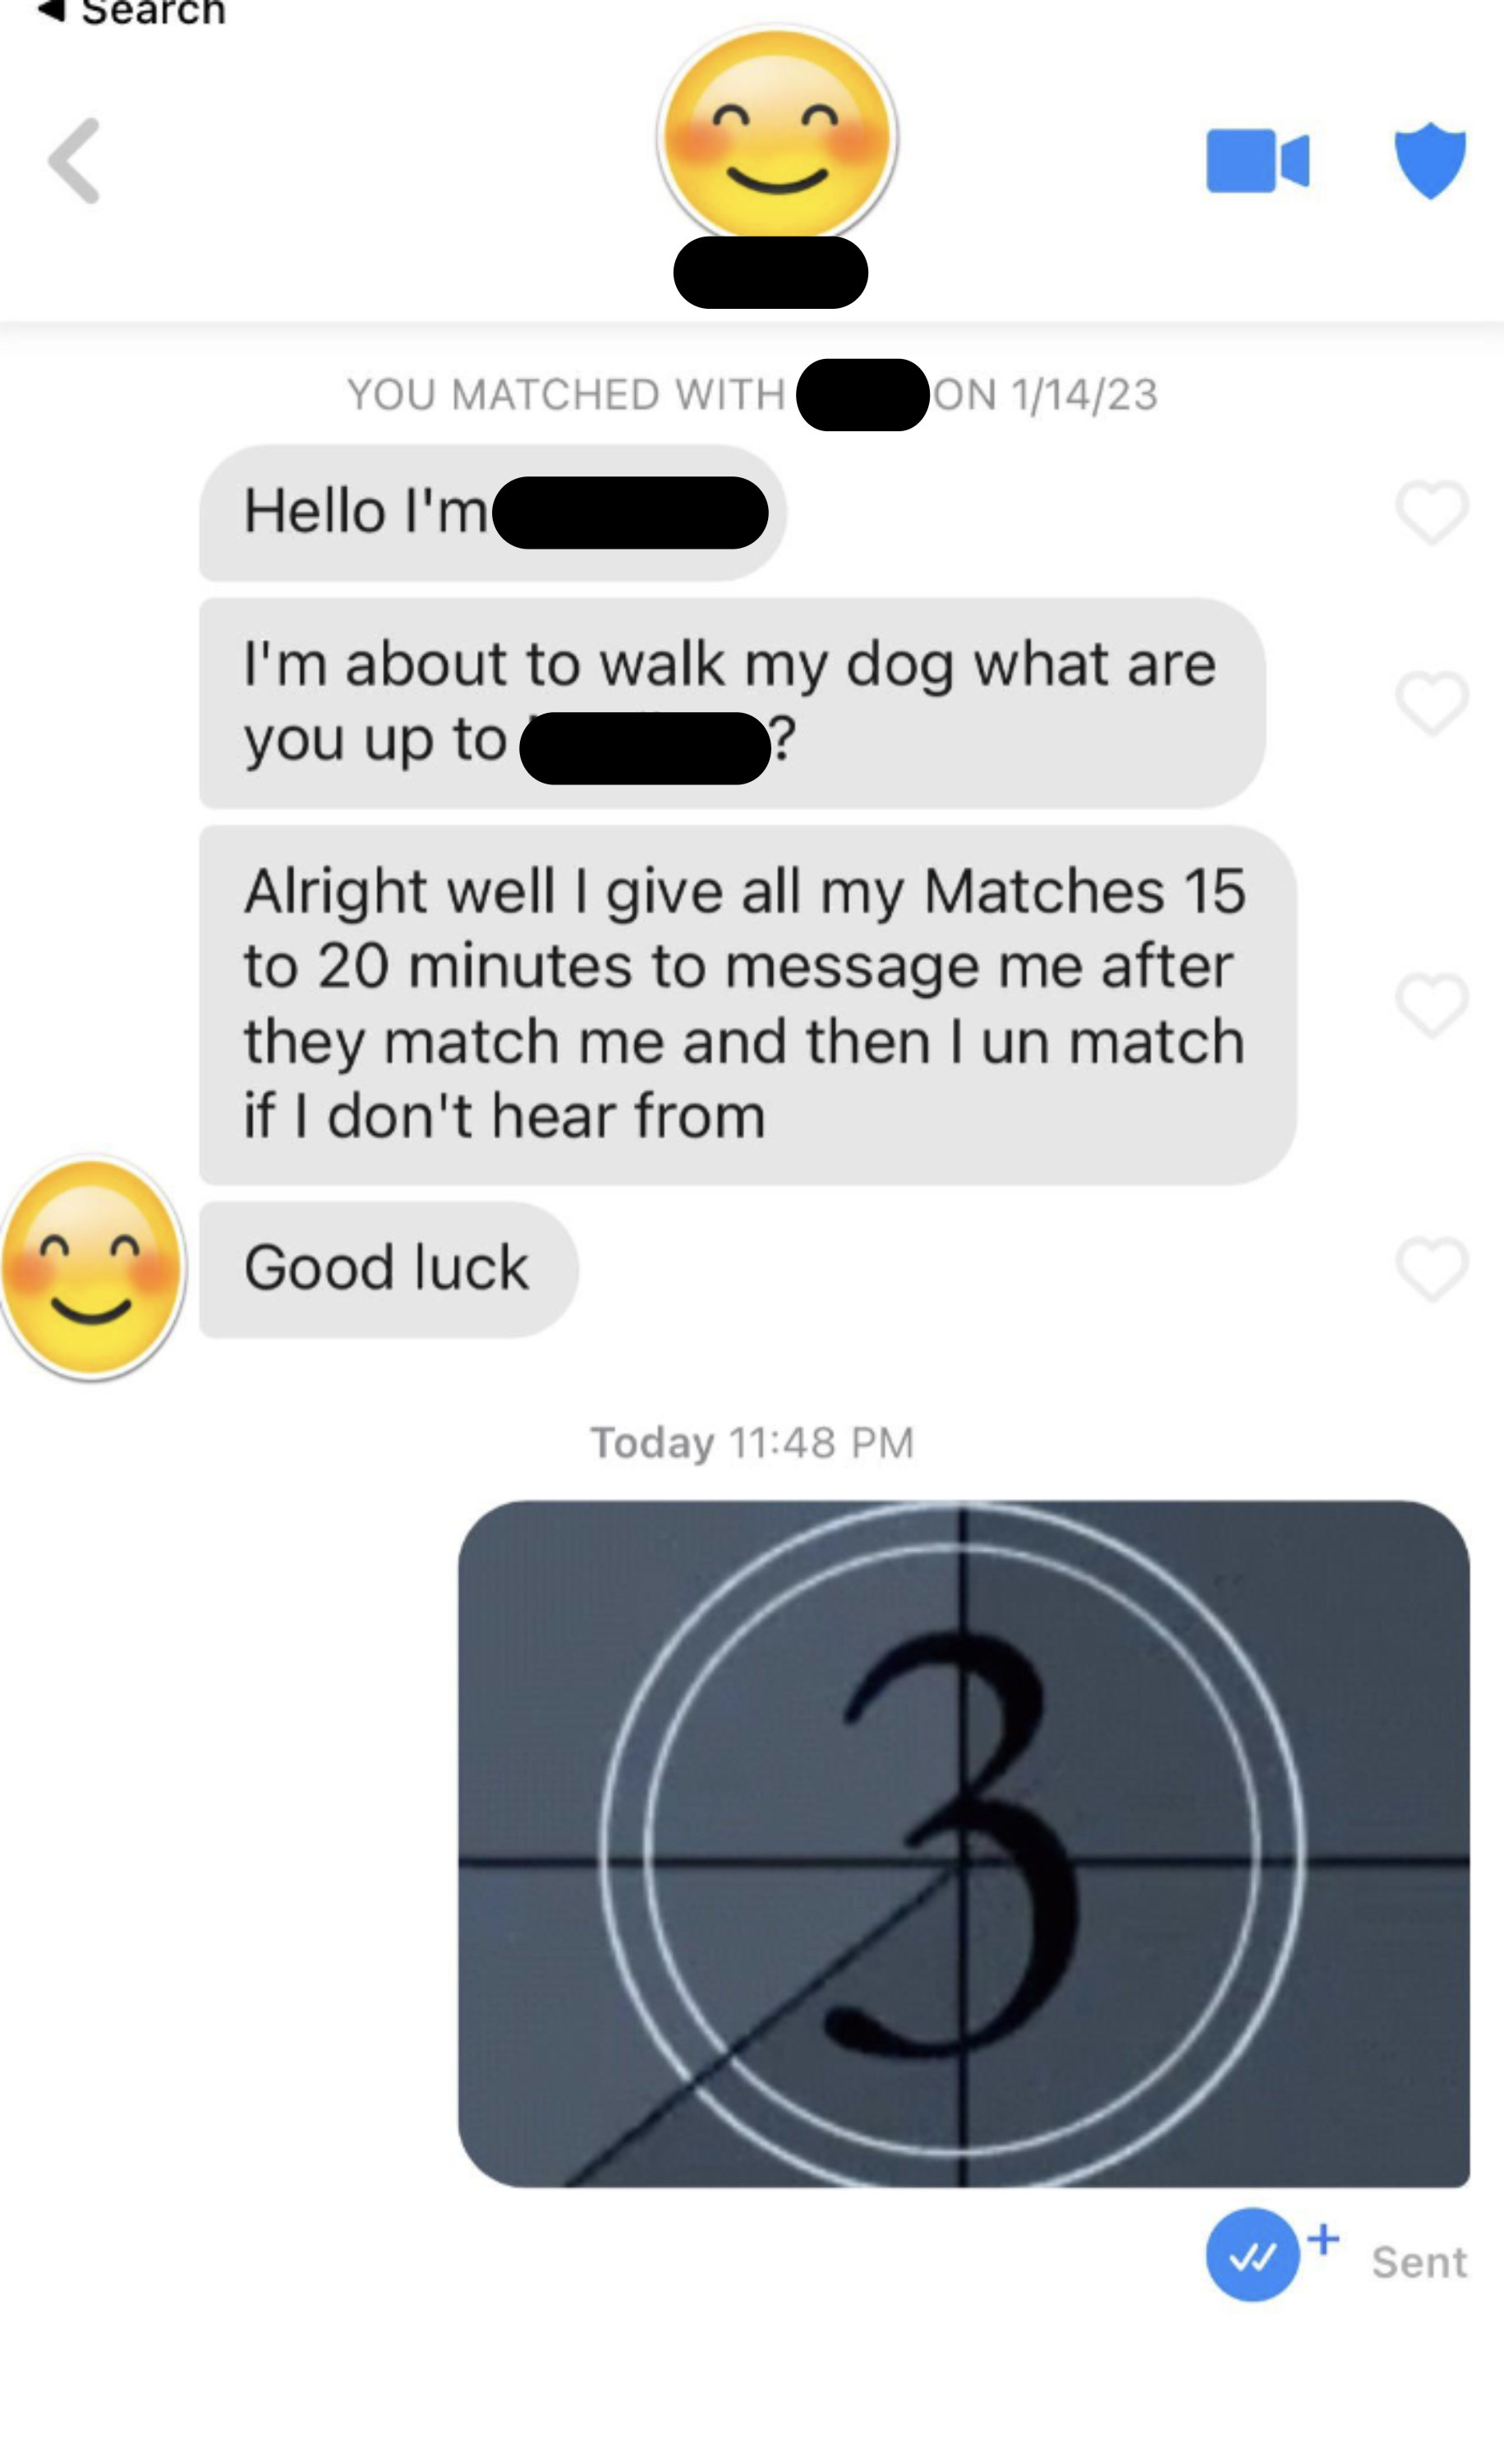 person 1: ok well i give my matches 15 minutes to respond before i unmatch person 2: sends a photo of a countdown starting at 3